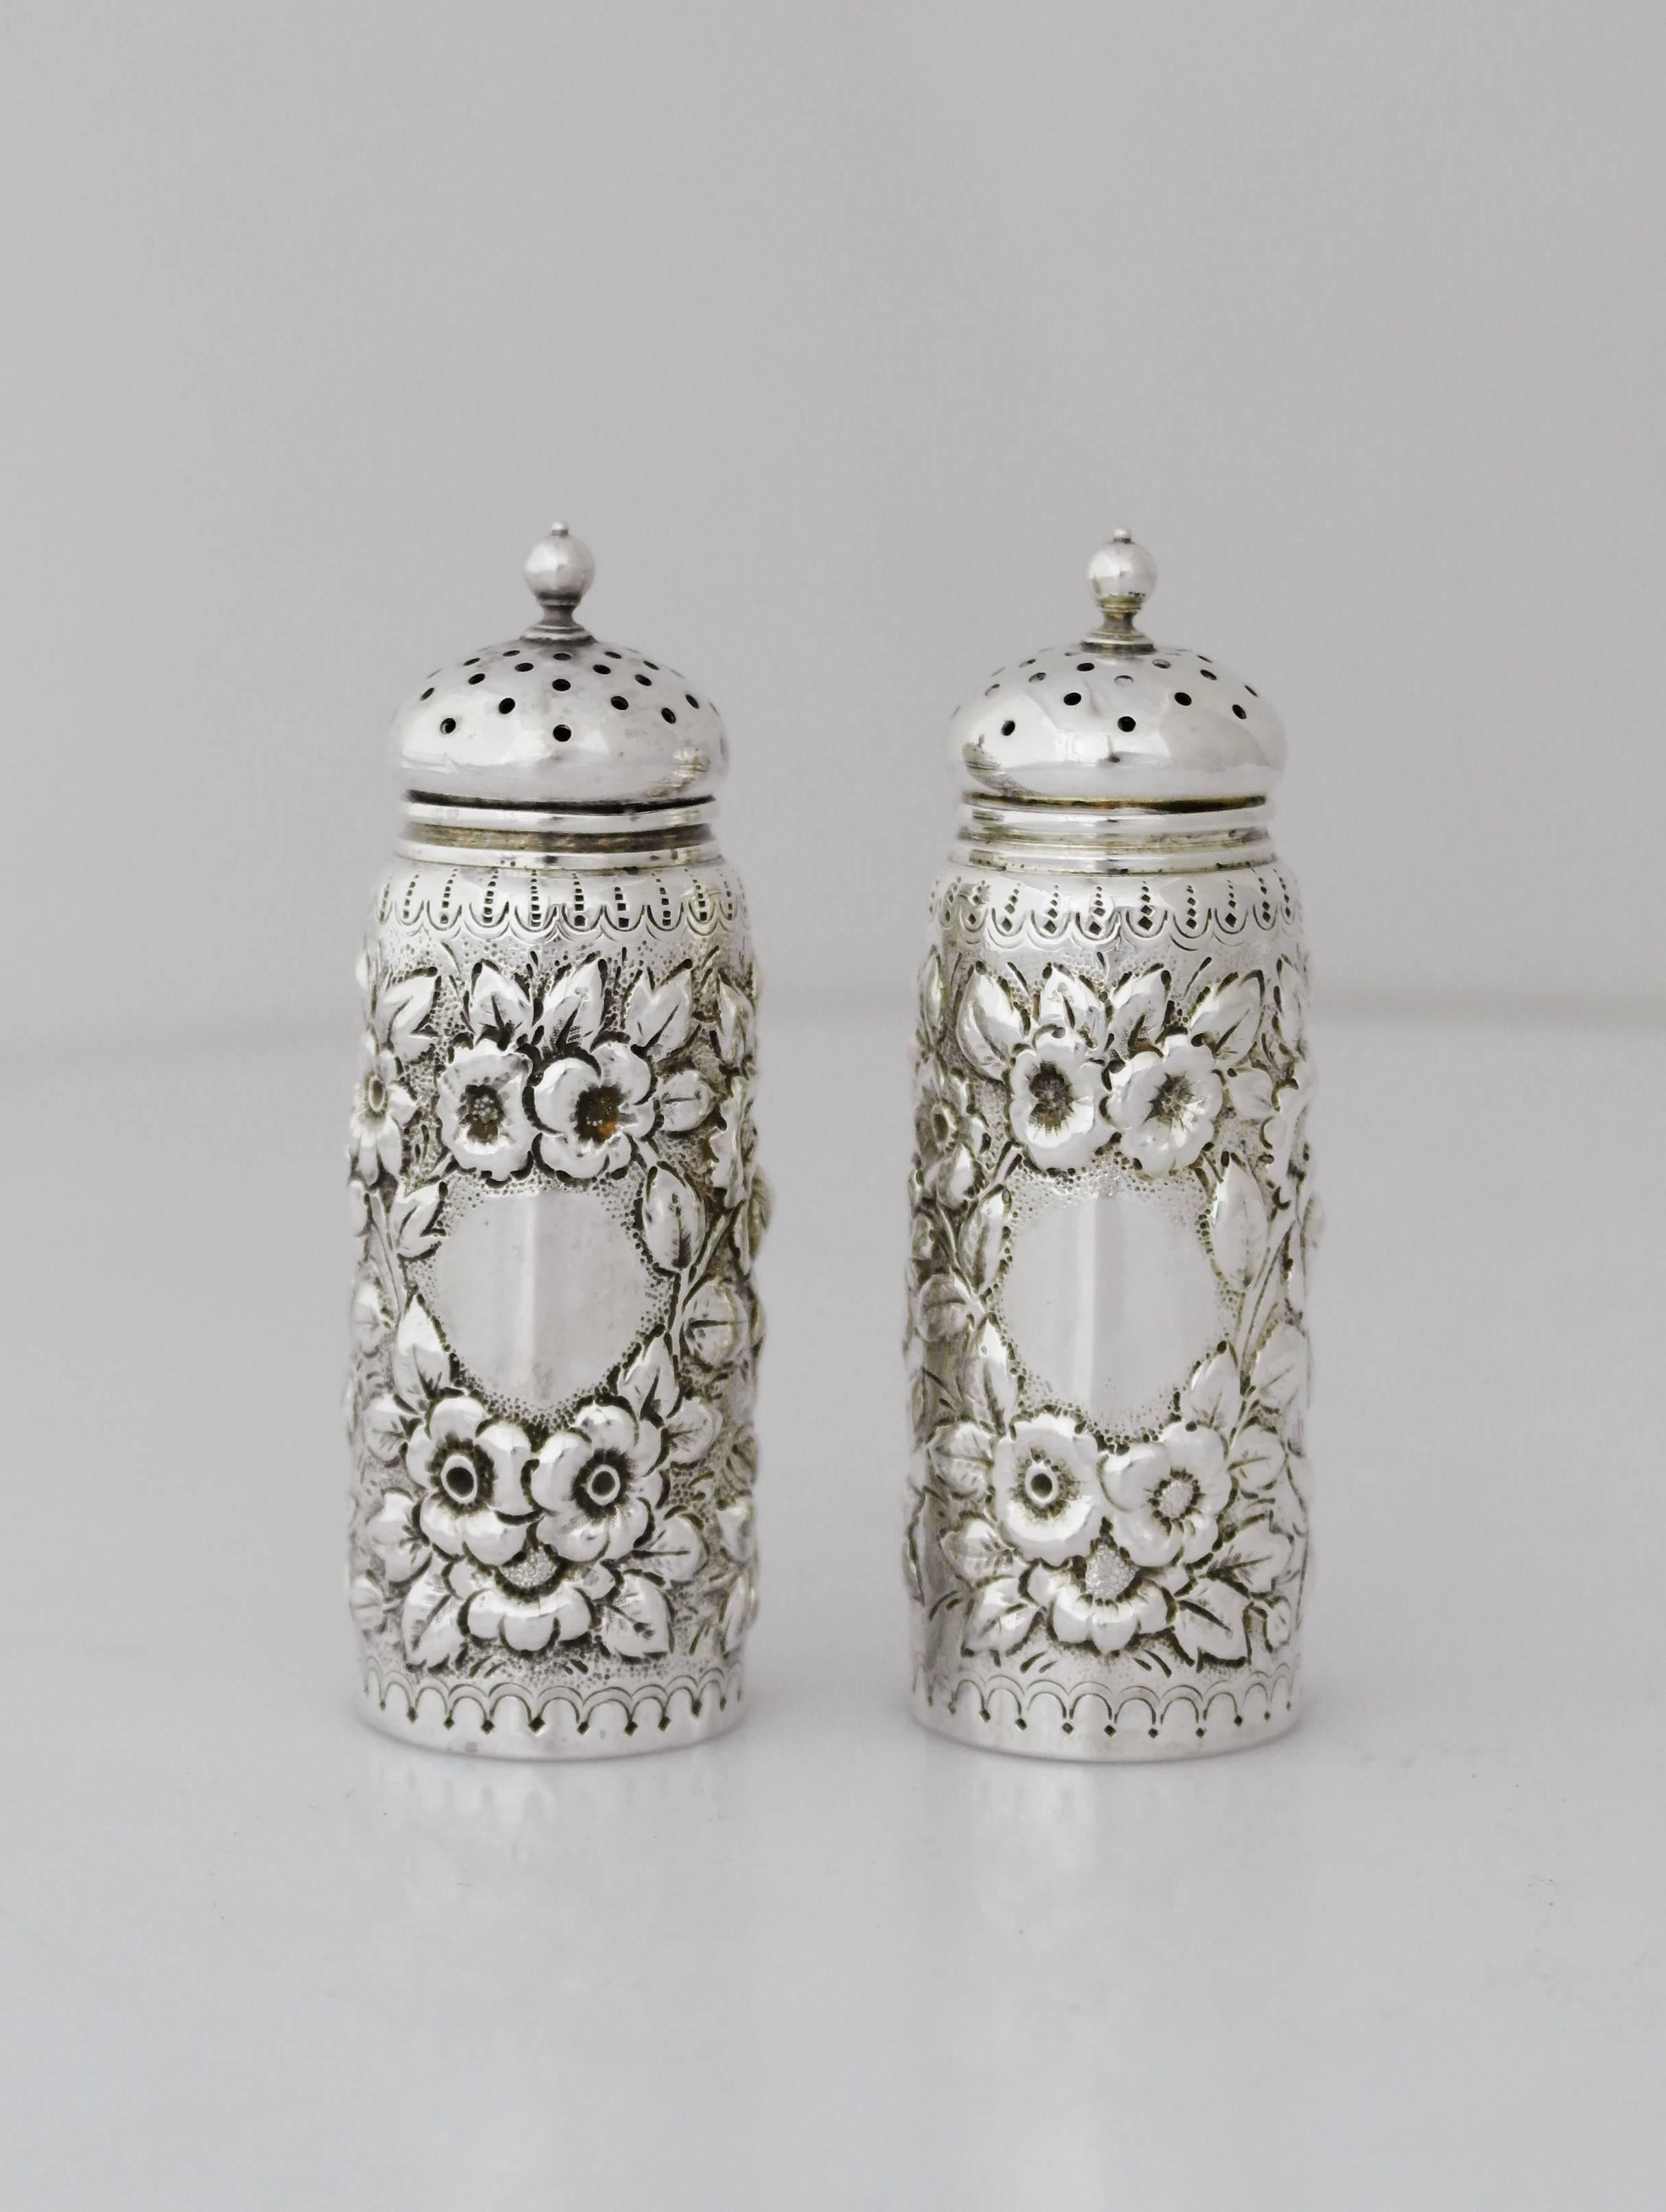 Being offered are an incredible pair of sterling silver salt and pepper shakers by Dominick & Haff of New York, New York. Tall, cylindrical form shakers with hand decorated floral motifs throughout, domed, pierced lids with ball finials. Dimensions